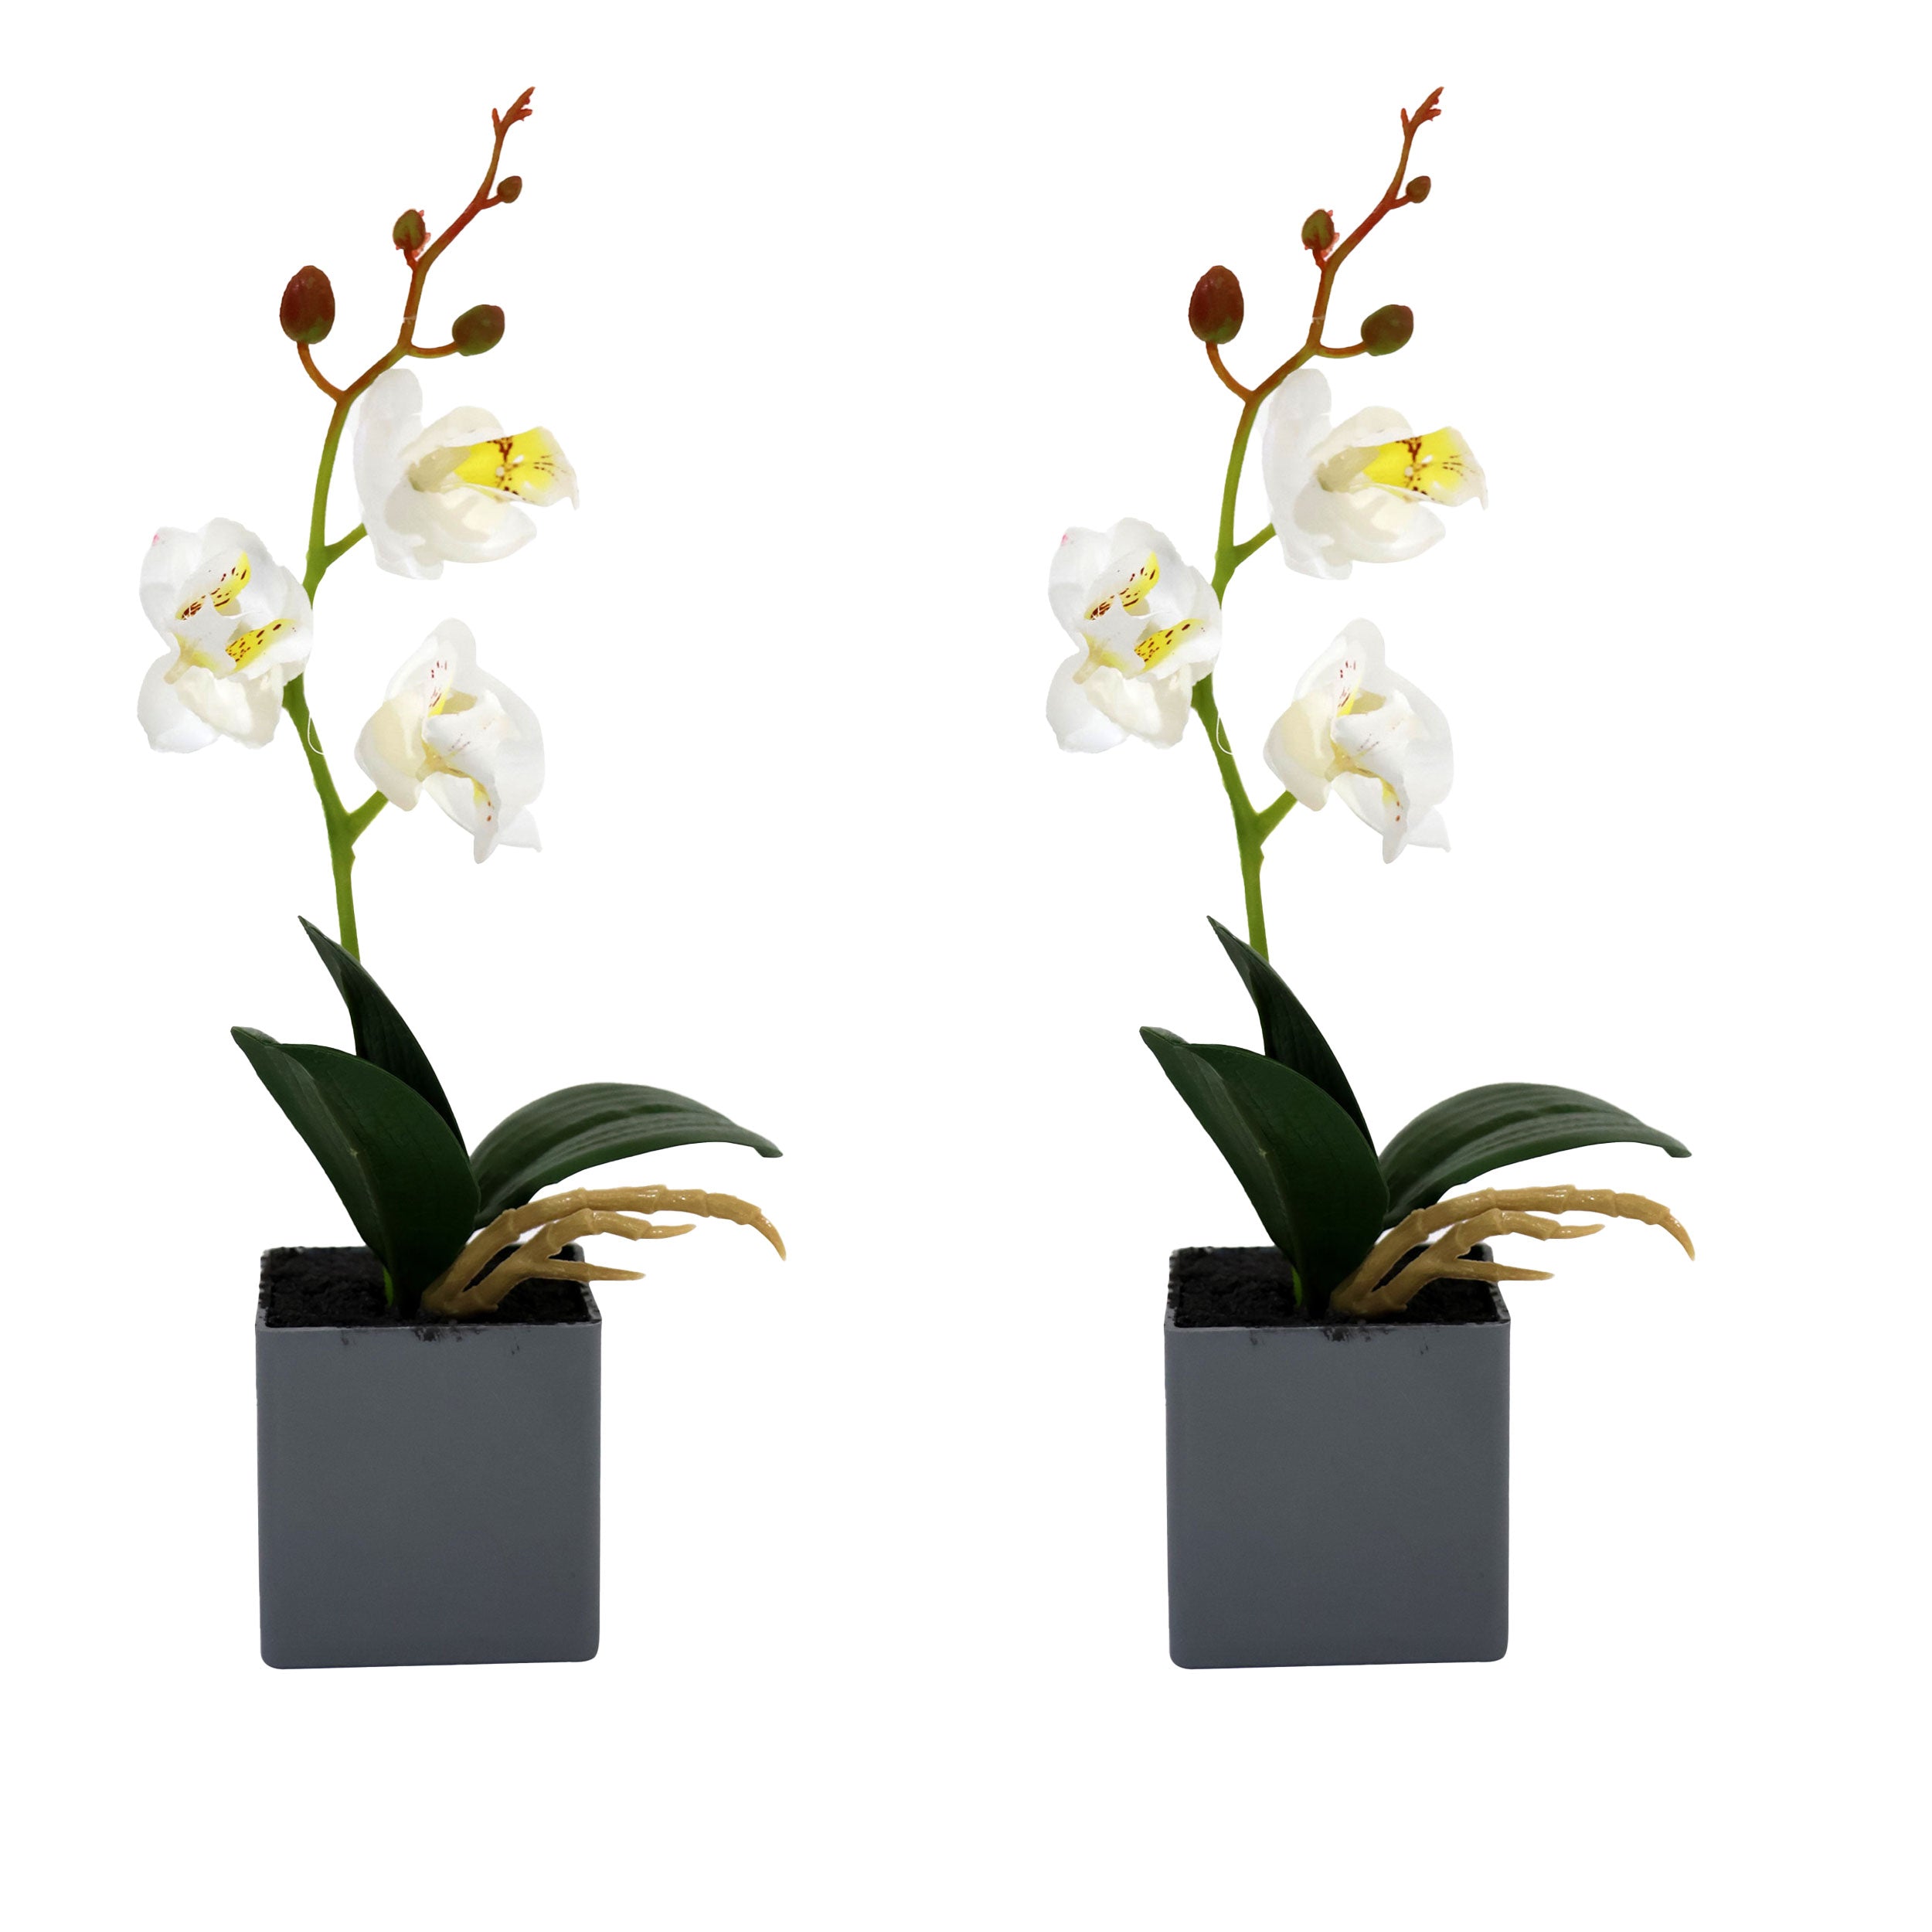 Aavana greens Artificial Bonsai Plant, Orchid Artificial Flowers Plant, Artificial Decorative Plant Home Office Indoor and Outdoor Decoration